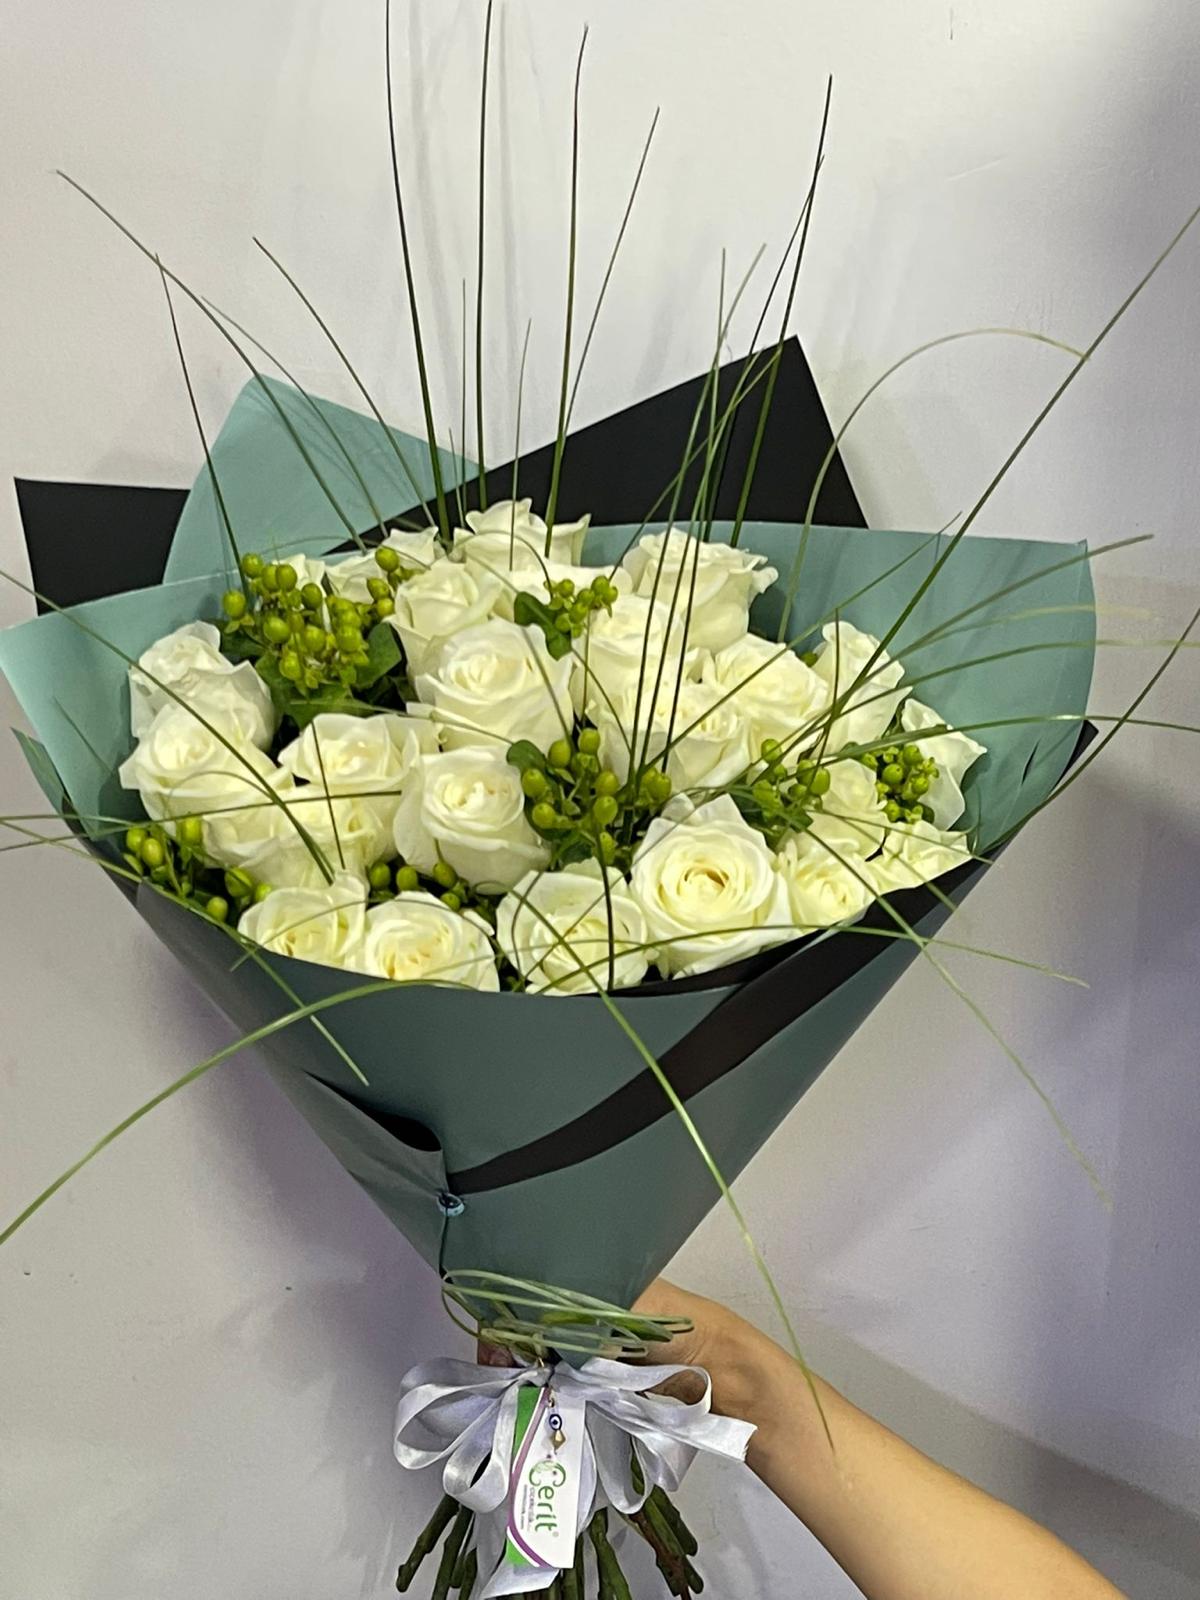  Belek Flower Delivery White Rose Bouquet 25 Pieces